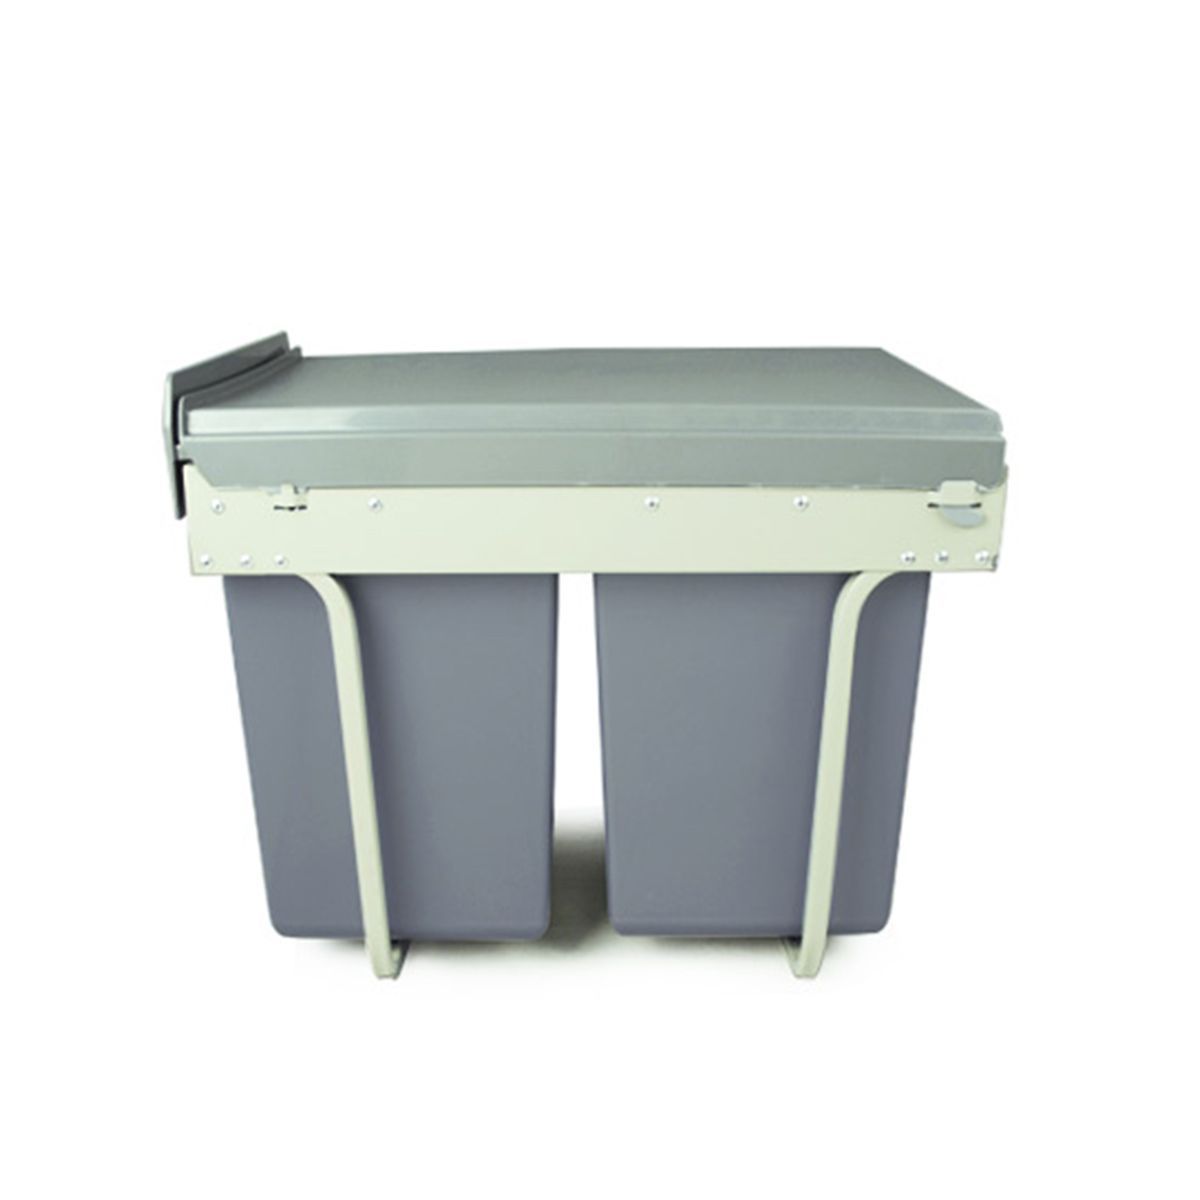 Double 20 Litre Pull Out Rubbish Bin | Crazy Sales